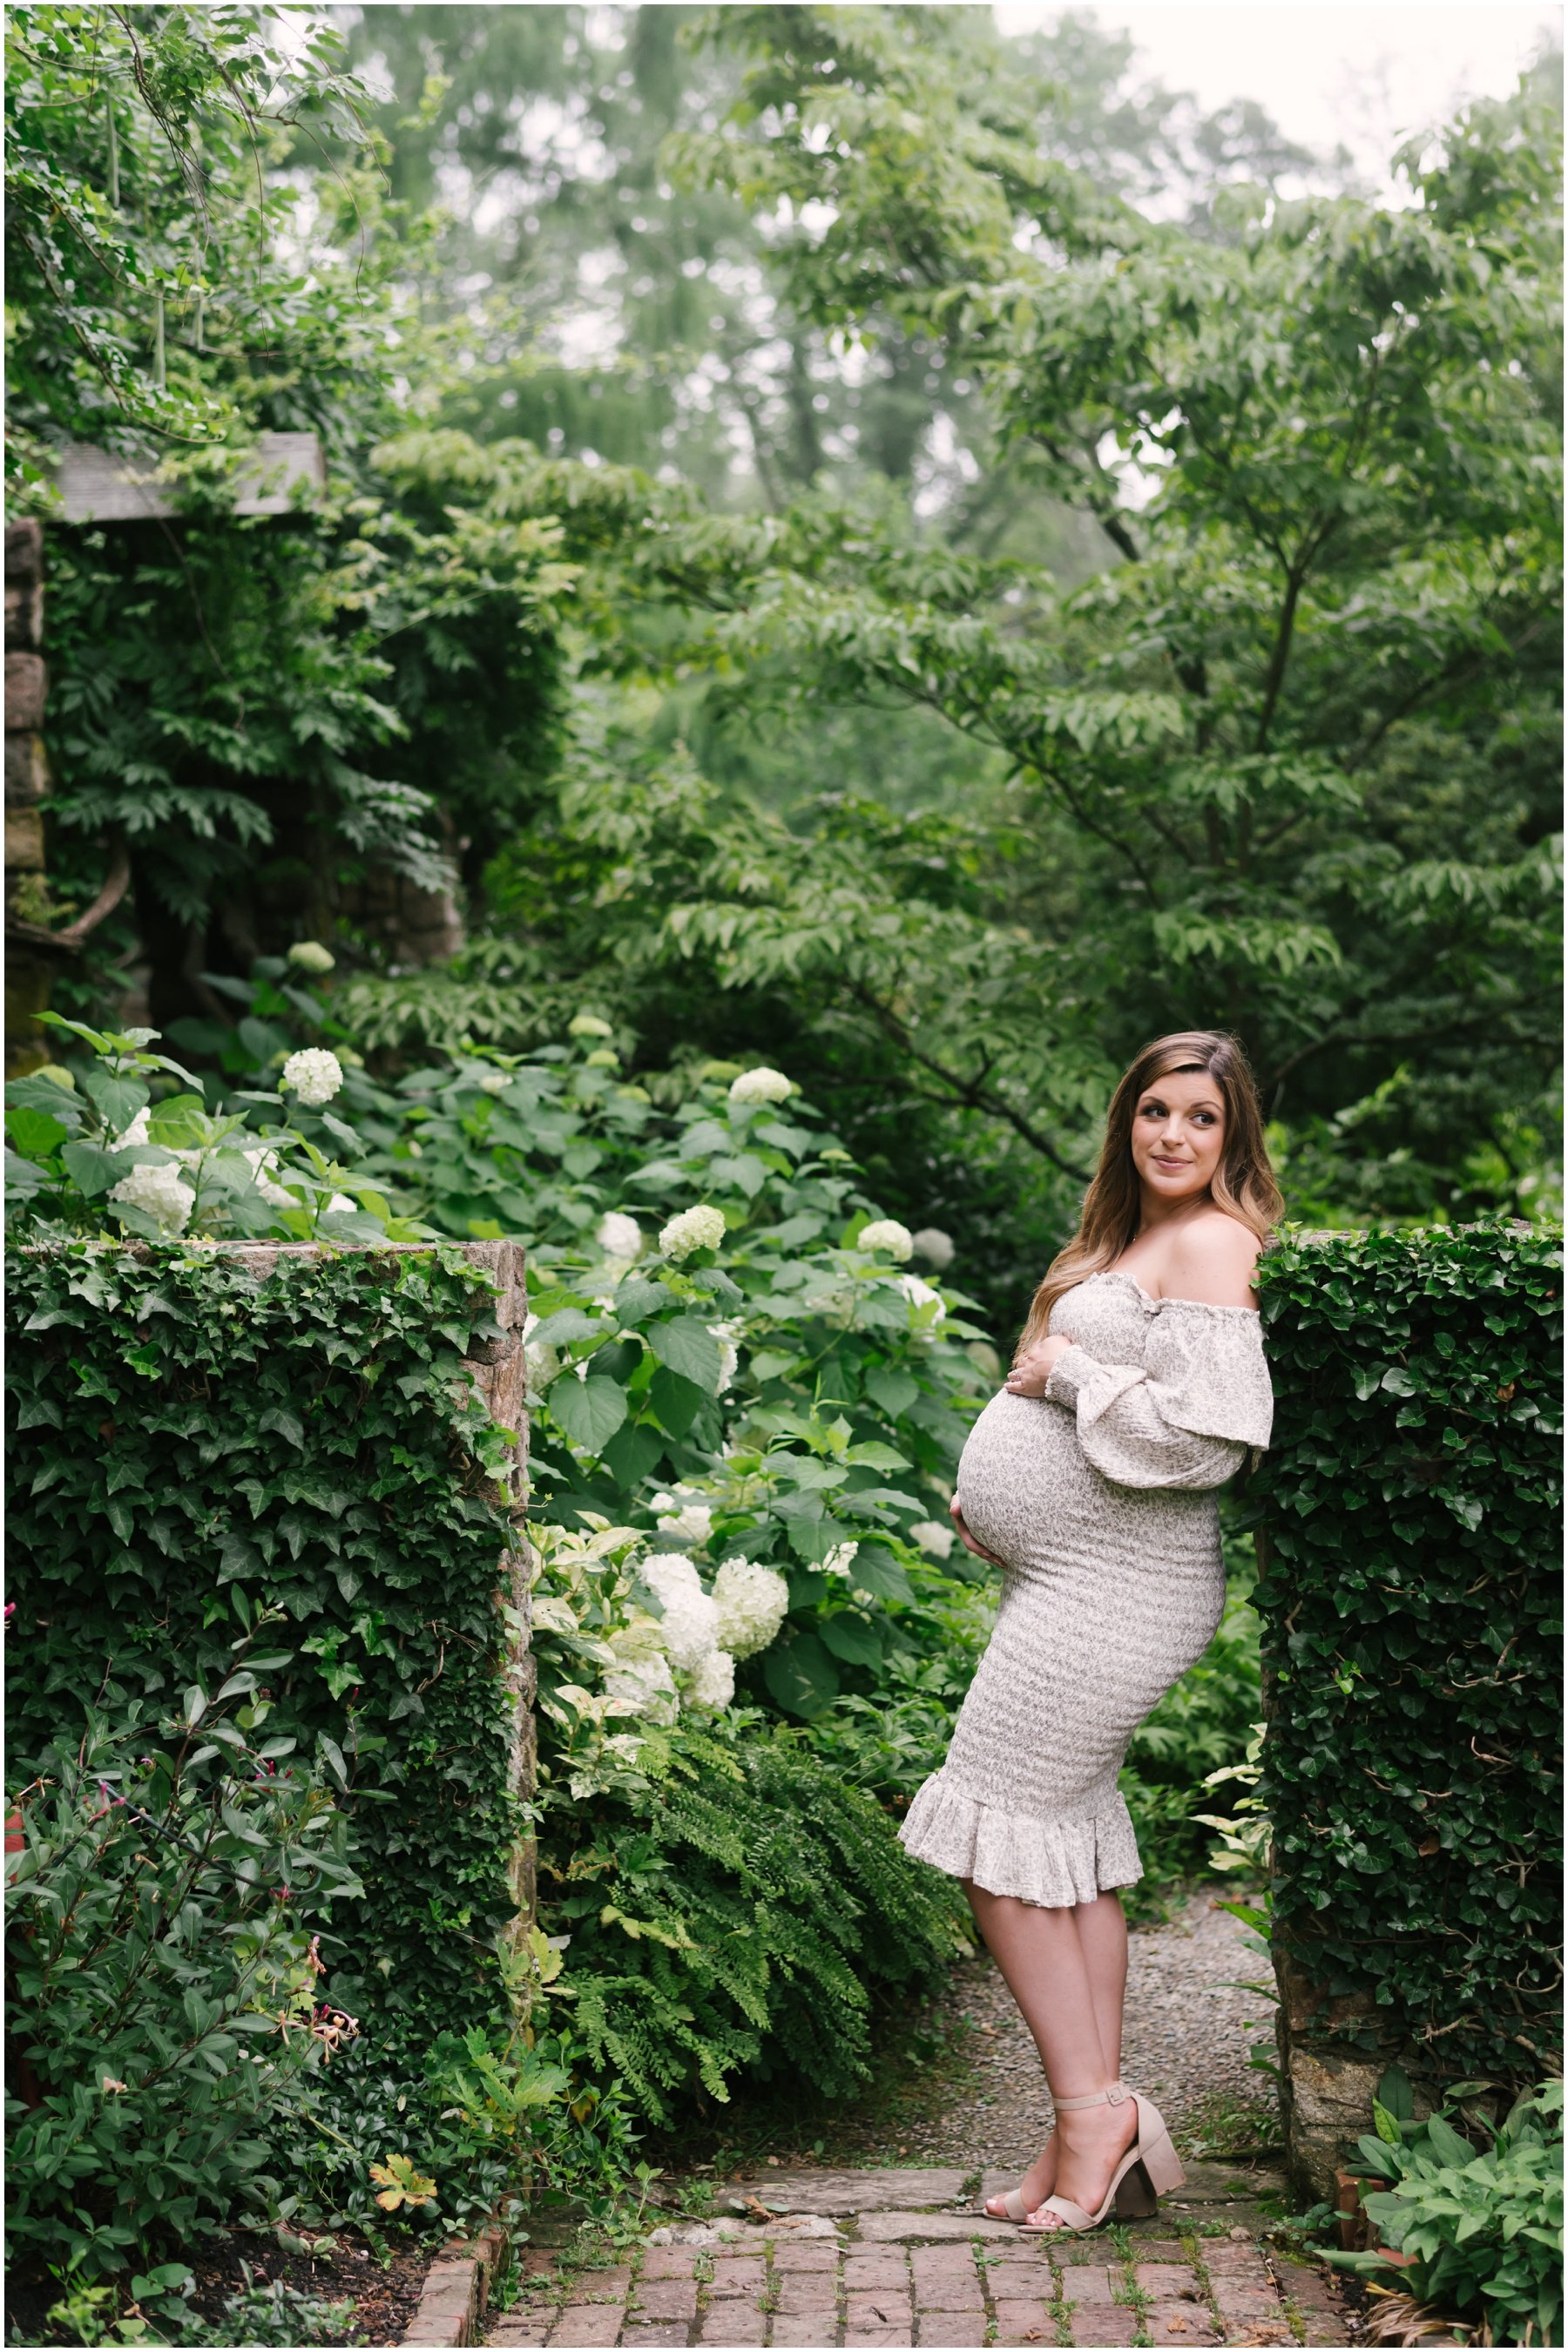 Mom-to-be leaning against garden wall during maternity session | NKB Photo